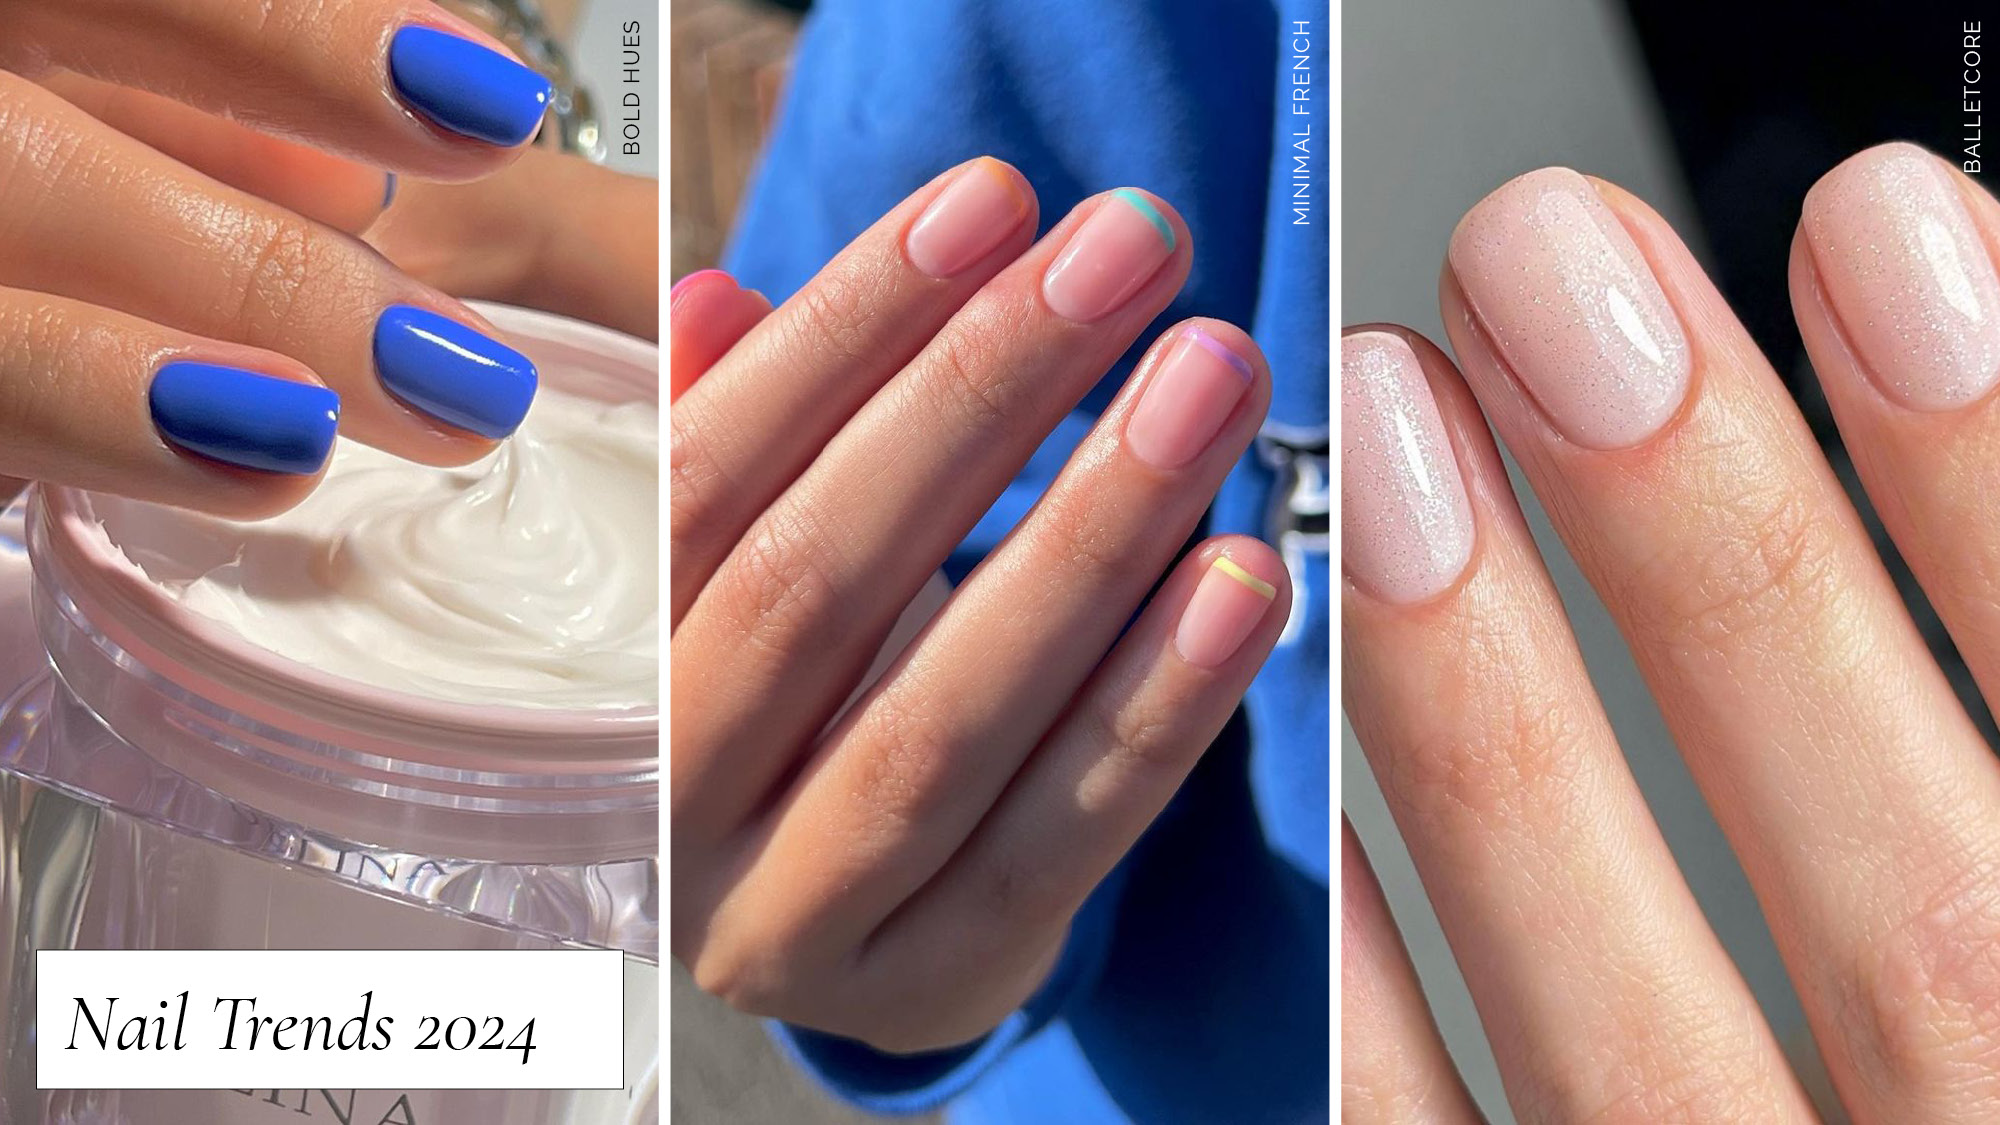 Spring's nail trends 2021 | The Independent